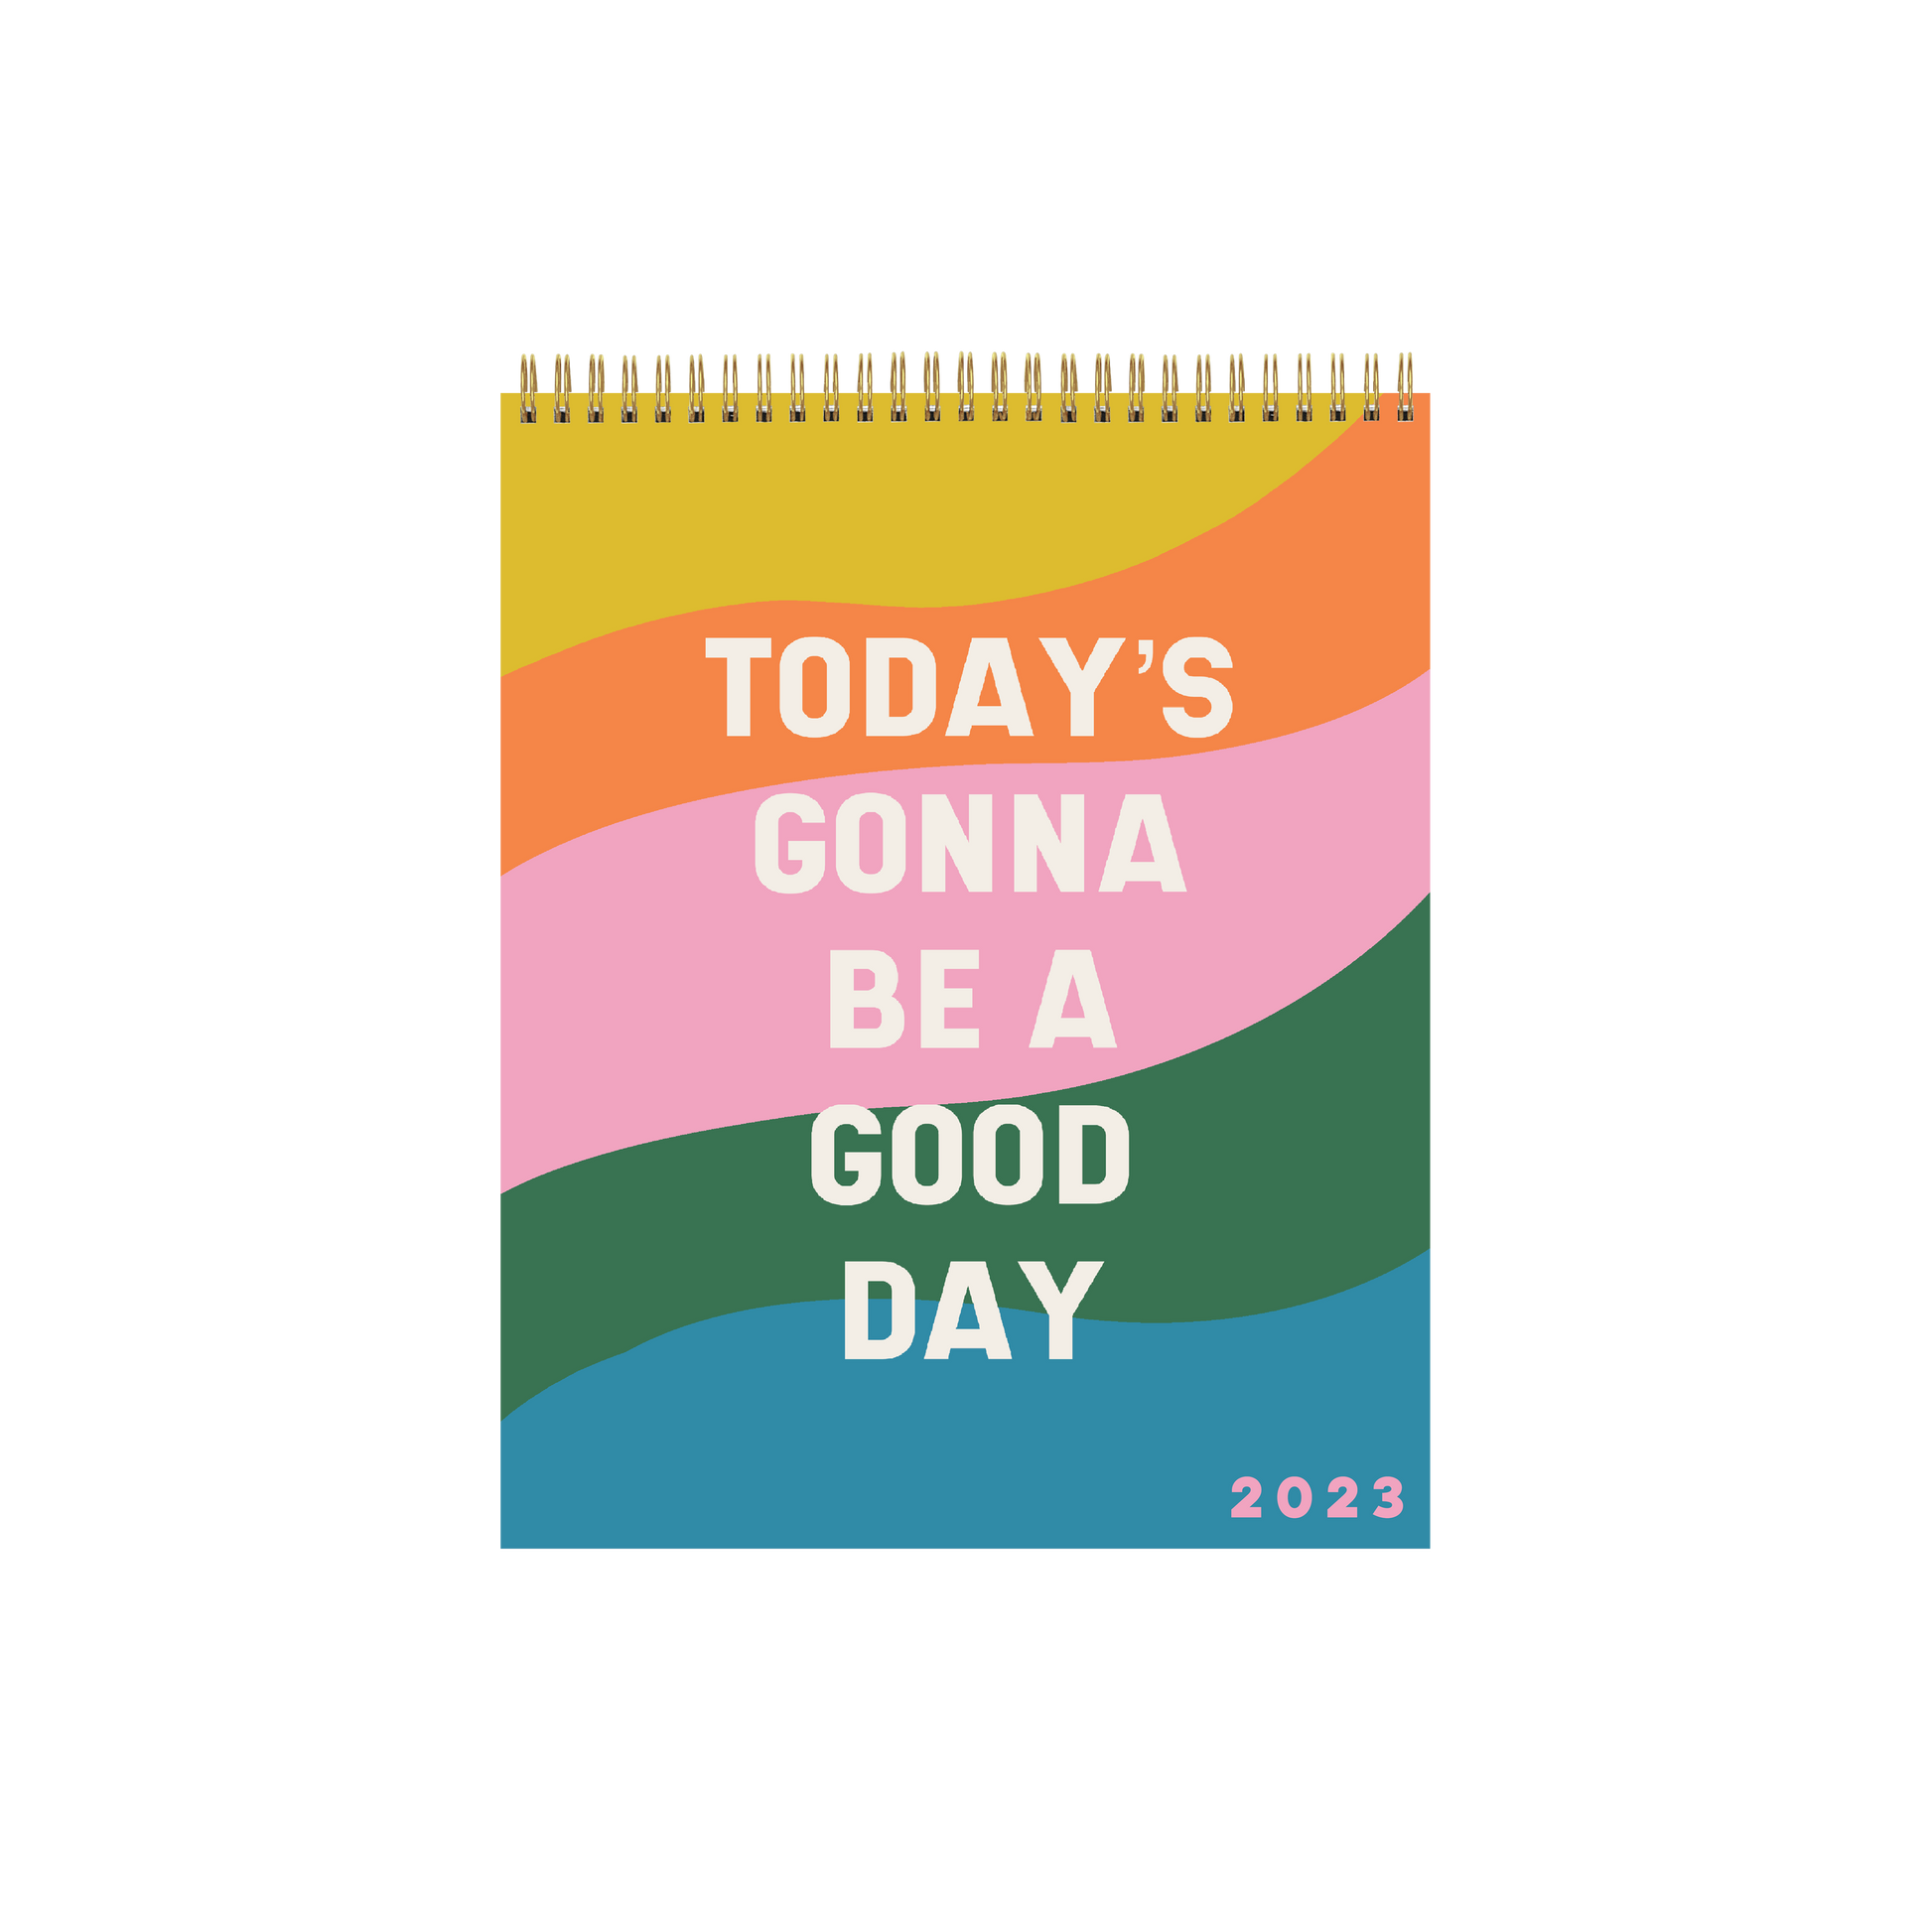 Spiral Calendar. Waves of Yellow, Orange, Pink, Green, and Blue. The words  " Today's Gonna Be A Good Day" in white with 2023 in the bottom right corner in pink.